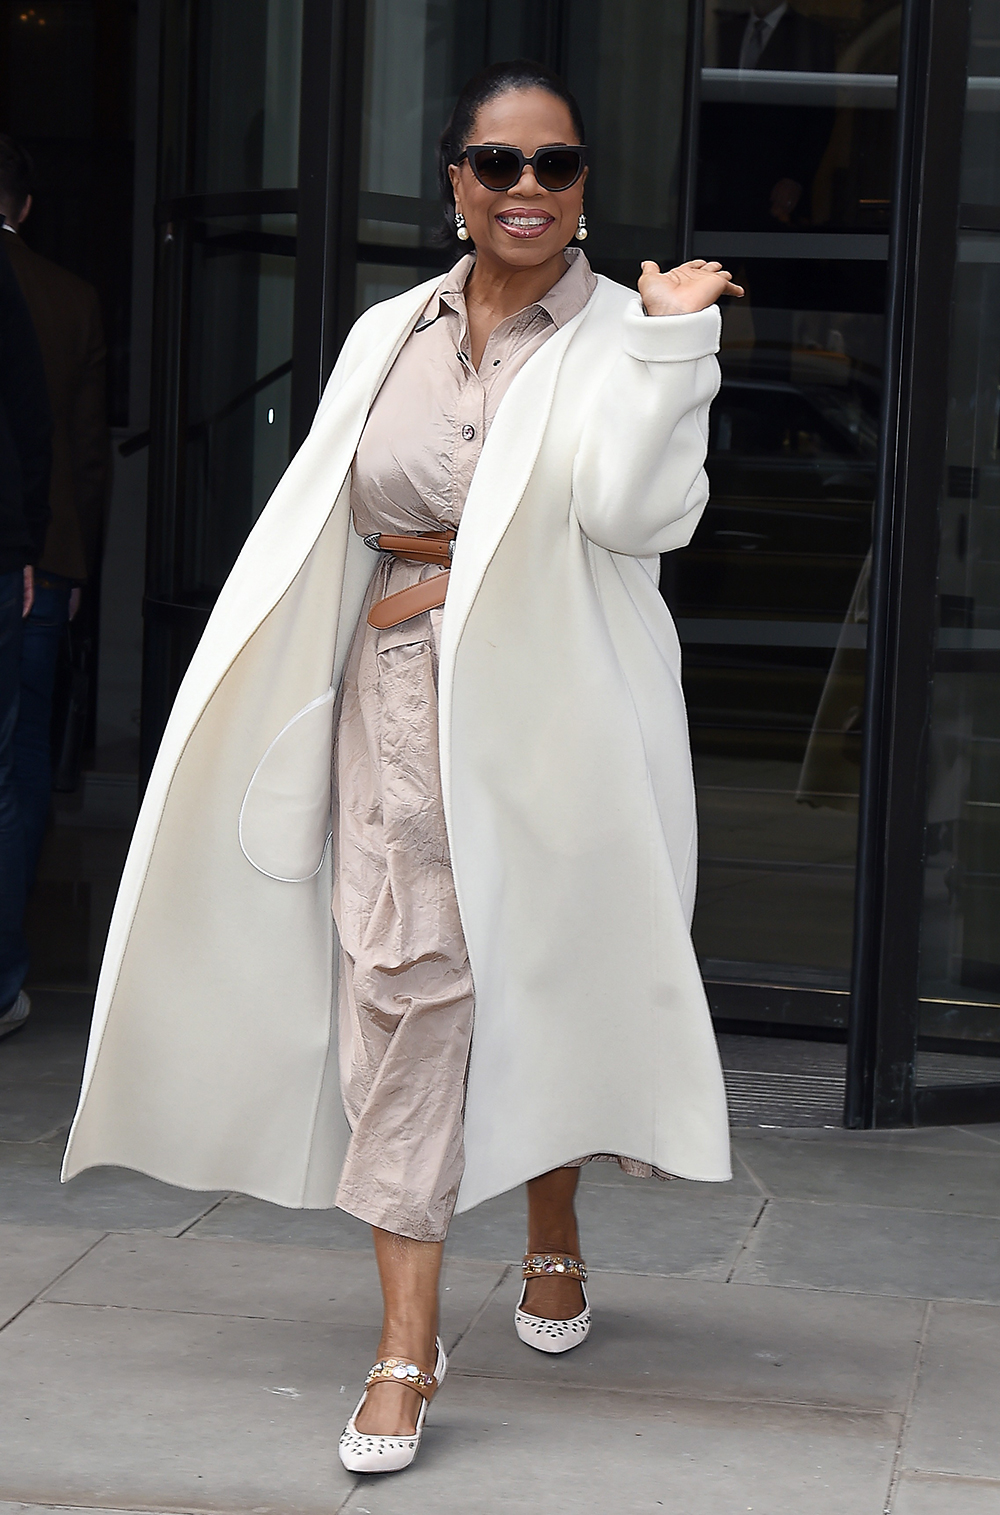 Over 50 fashion and clothing inspiration: Oprah wearing a white coat with a beige shirt dress and kitten heel pumps